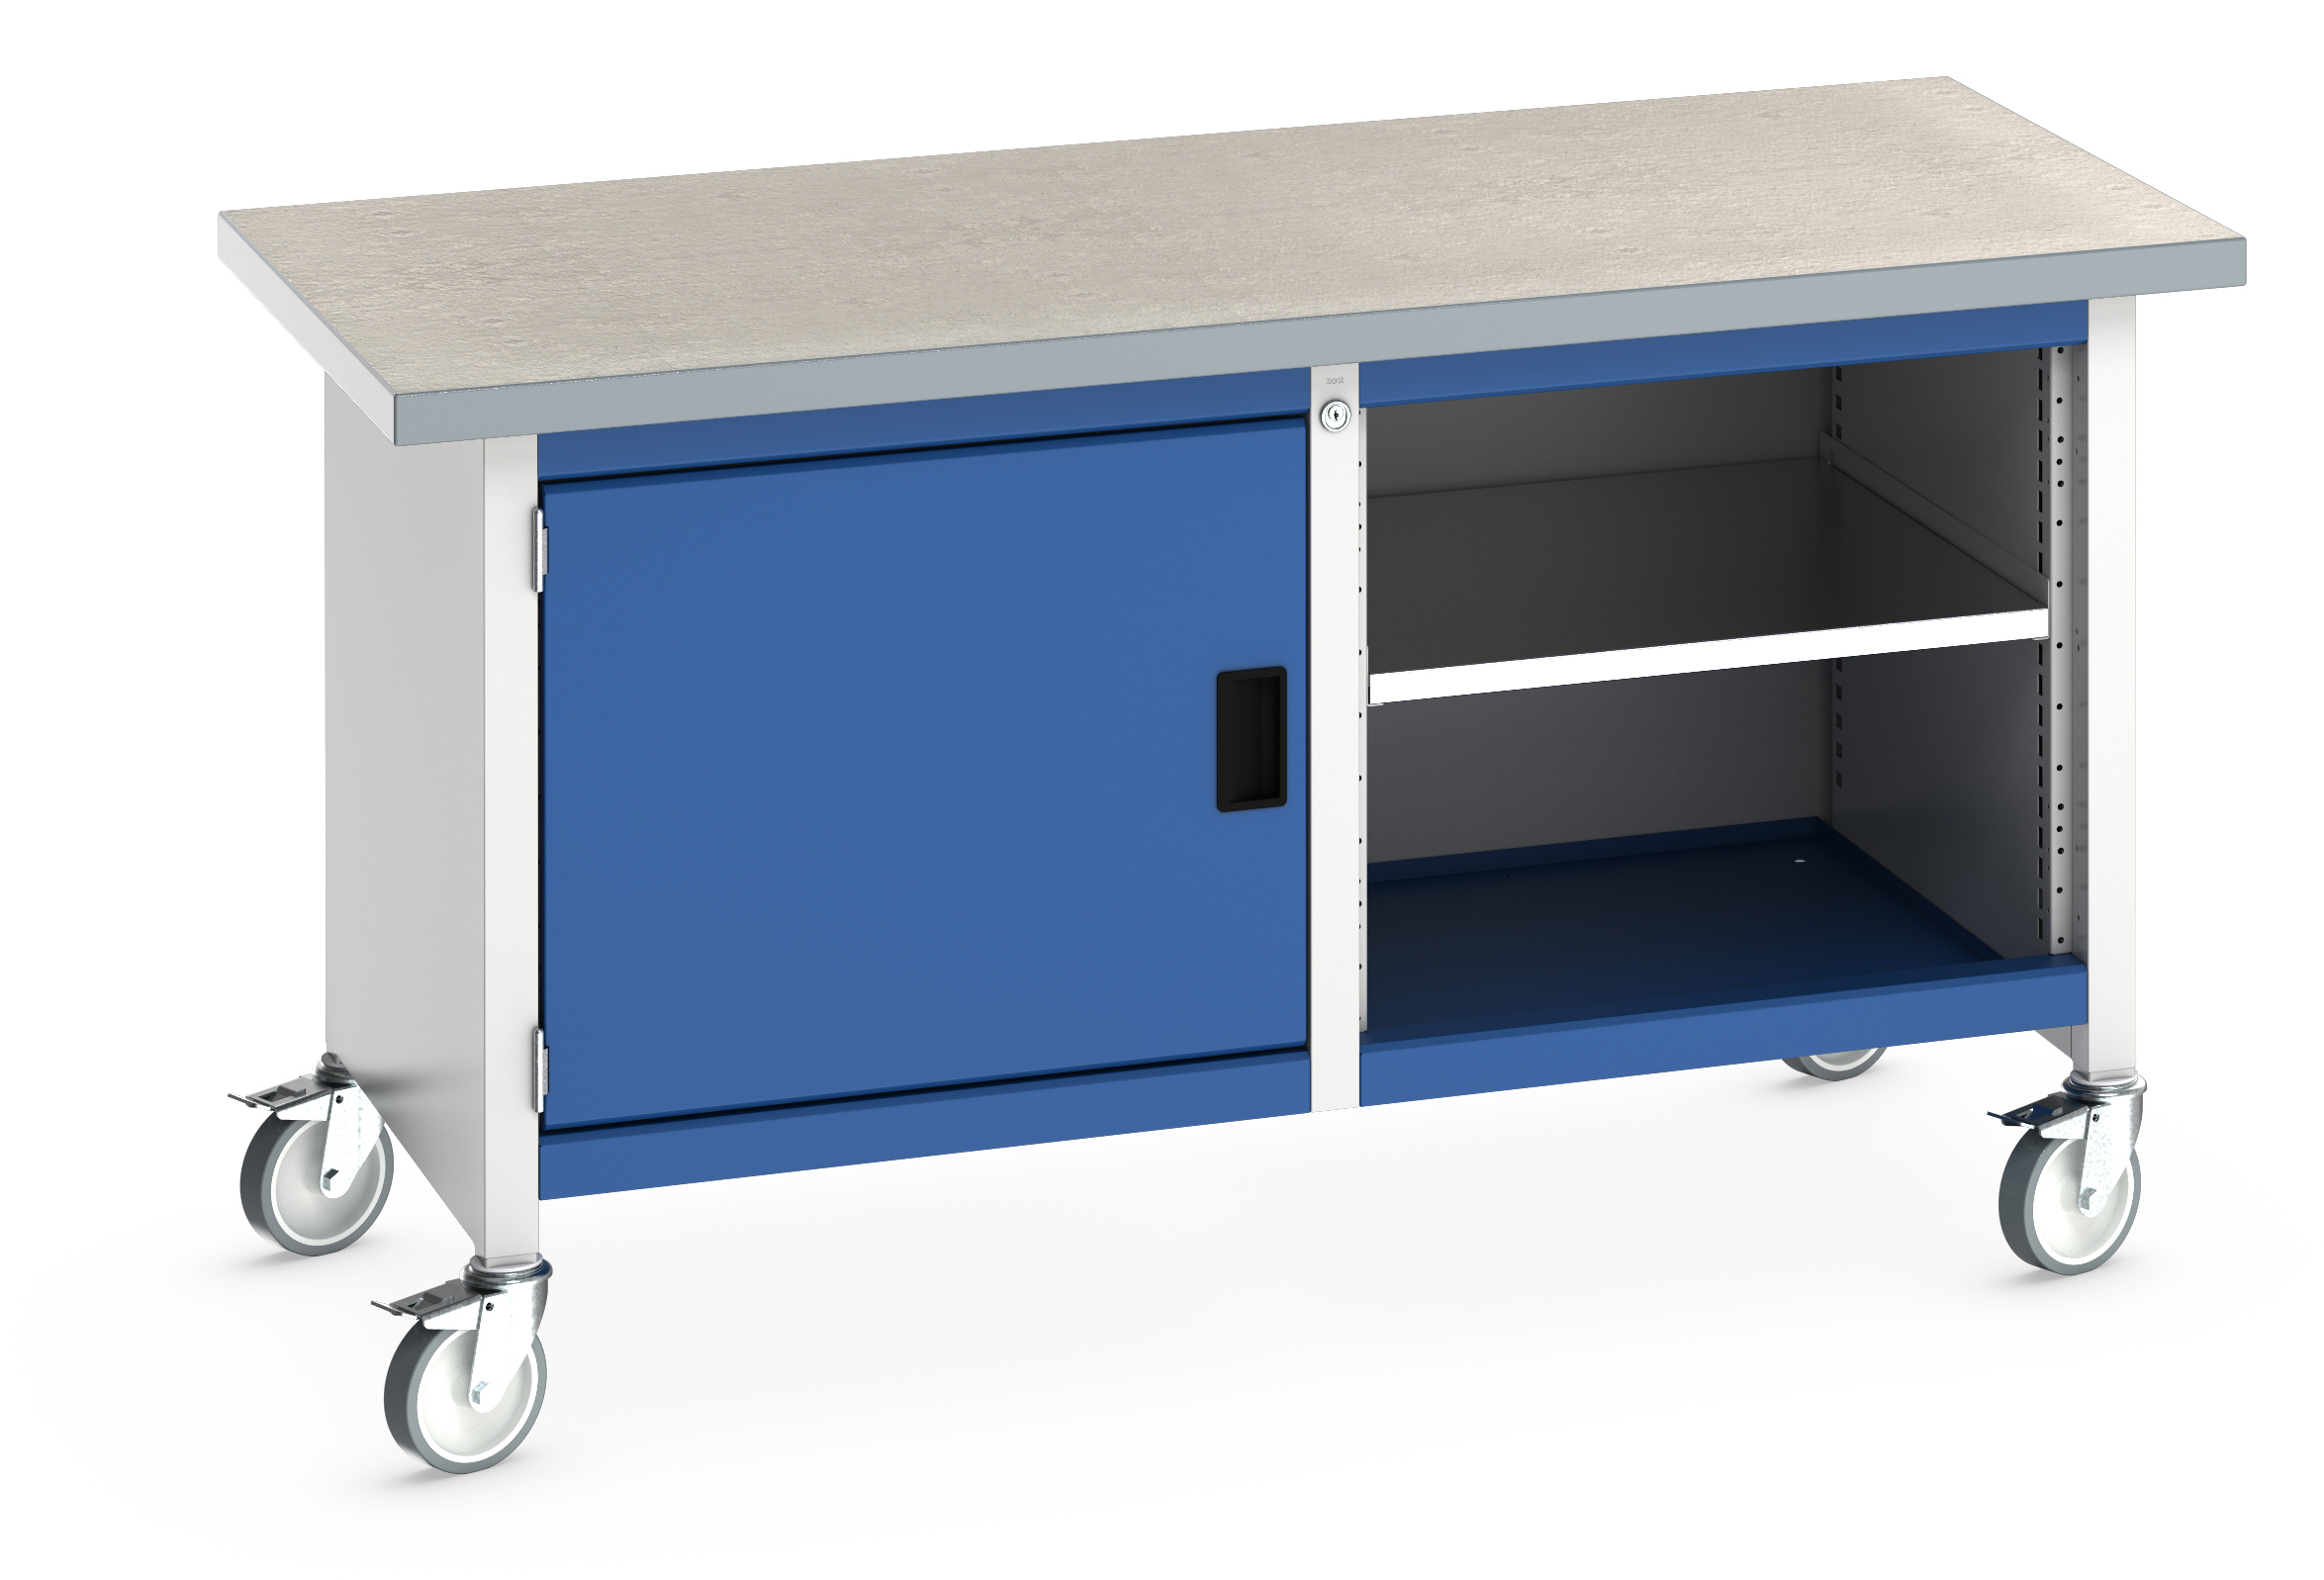 Bott Cubio Mobile Storage Bench With Full Cupboard / Open Cupboard - 41002096.11V